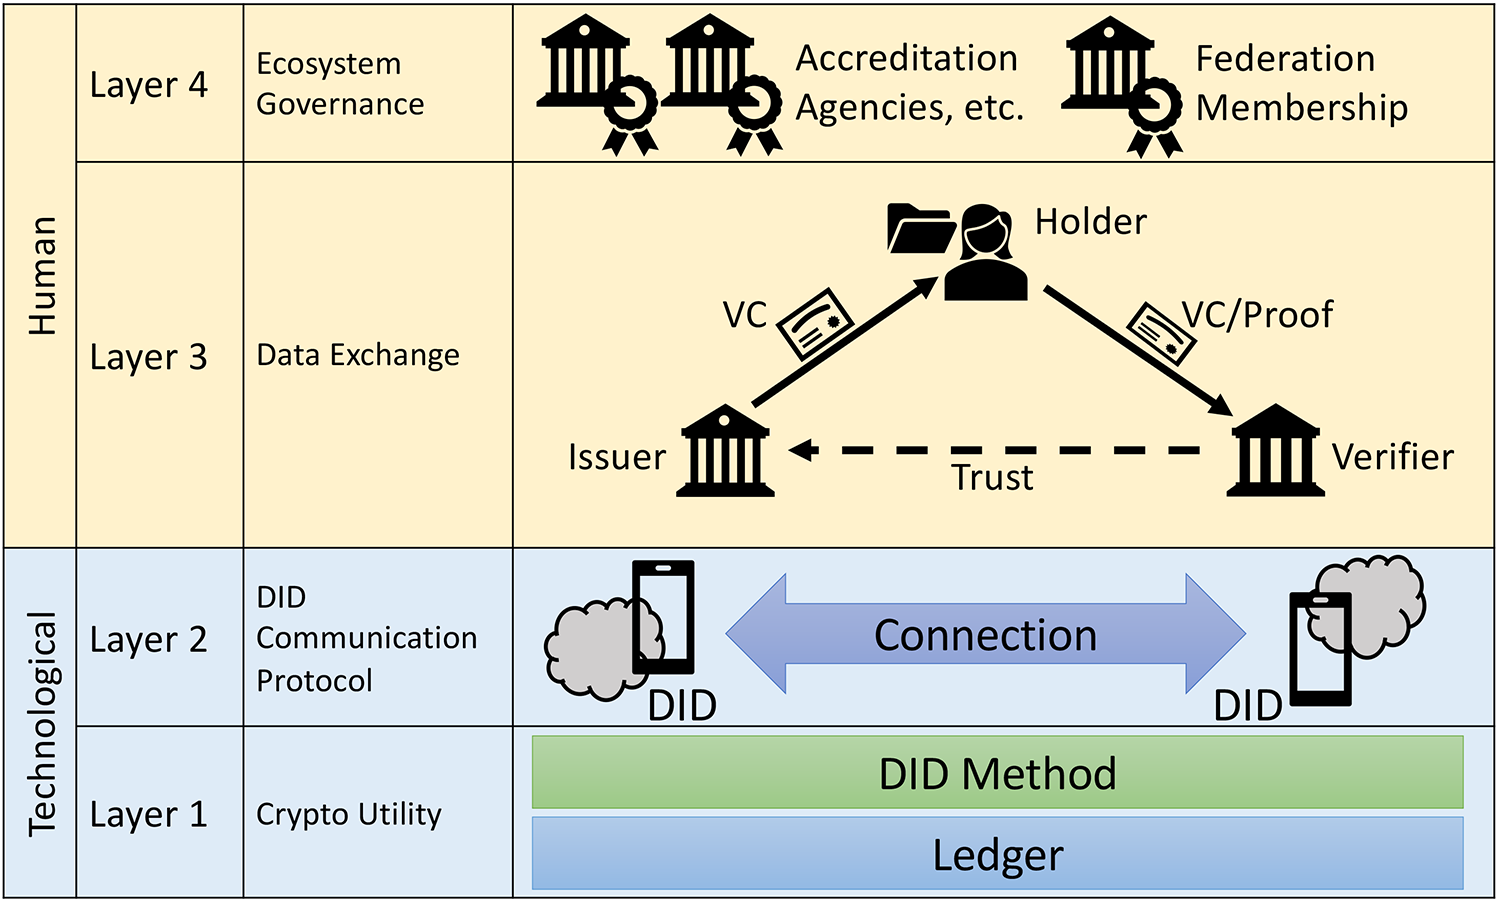 Technological | Layer 1: Crypto Utility - DID Method, Ledger. Layer 2: DID Communication Protocol - DID (double ended arrow with Connection in the bar) DID. Human | Layer 3: Data Exchange - Issuer sends VC to Holder, Holder sends VC/Proof to Verifier, Dotted line with arrow from Verifier to Issuer.  Layer 4: Ecosystem Governance - Accreditation Agencies, etc. and Federation Membership.